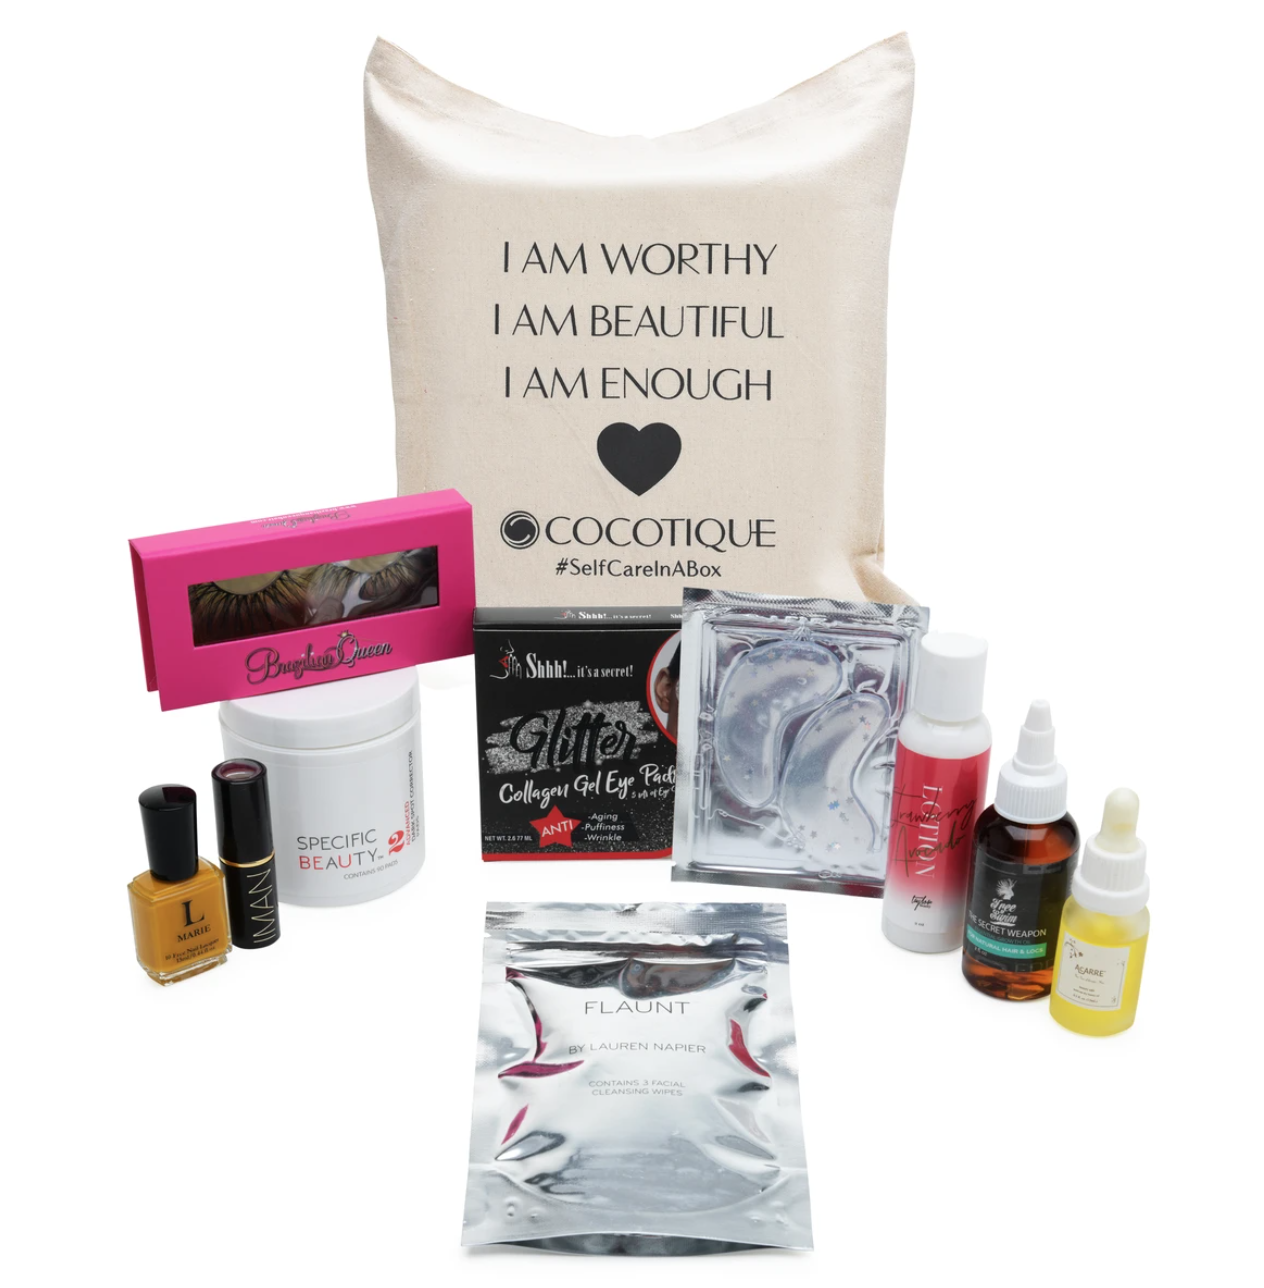 COCOTIQUE Women of Color Limited Edition Box Available Now!